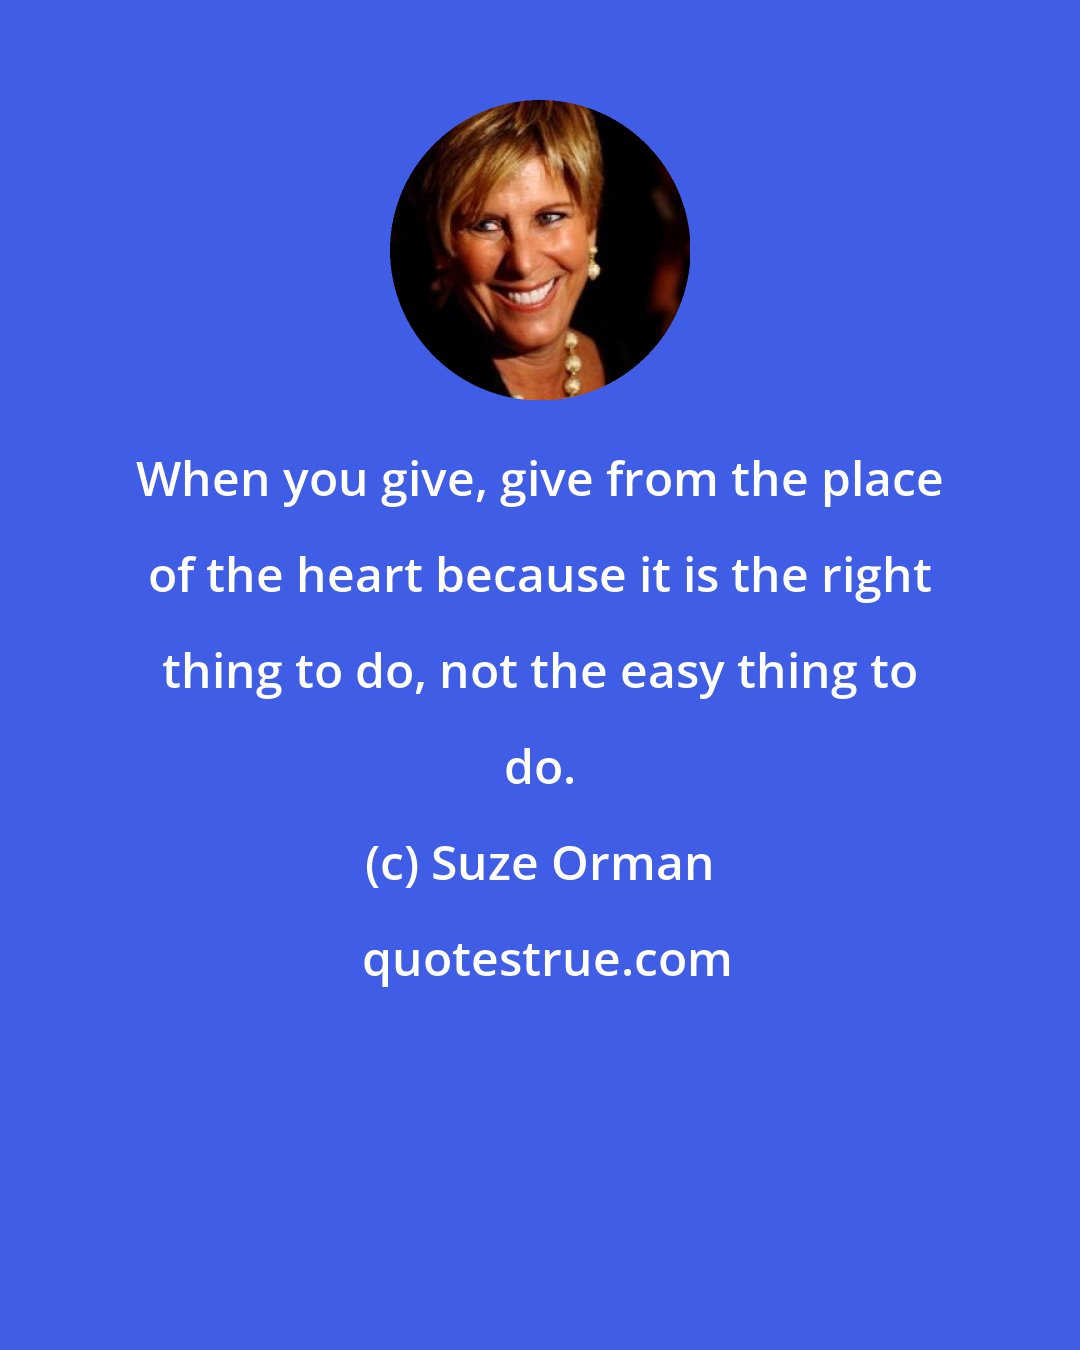 Suze Orman: When you give, give from the place of the heart because it is the right thing to do, not the easy thing to do.